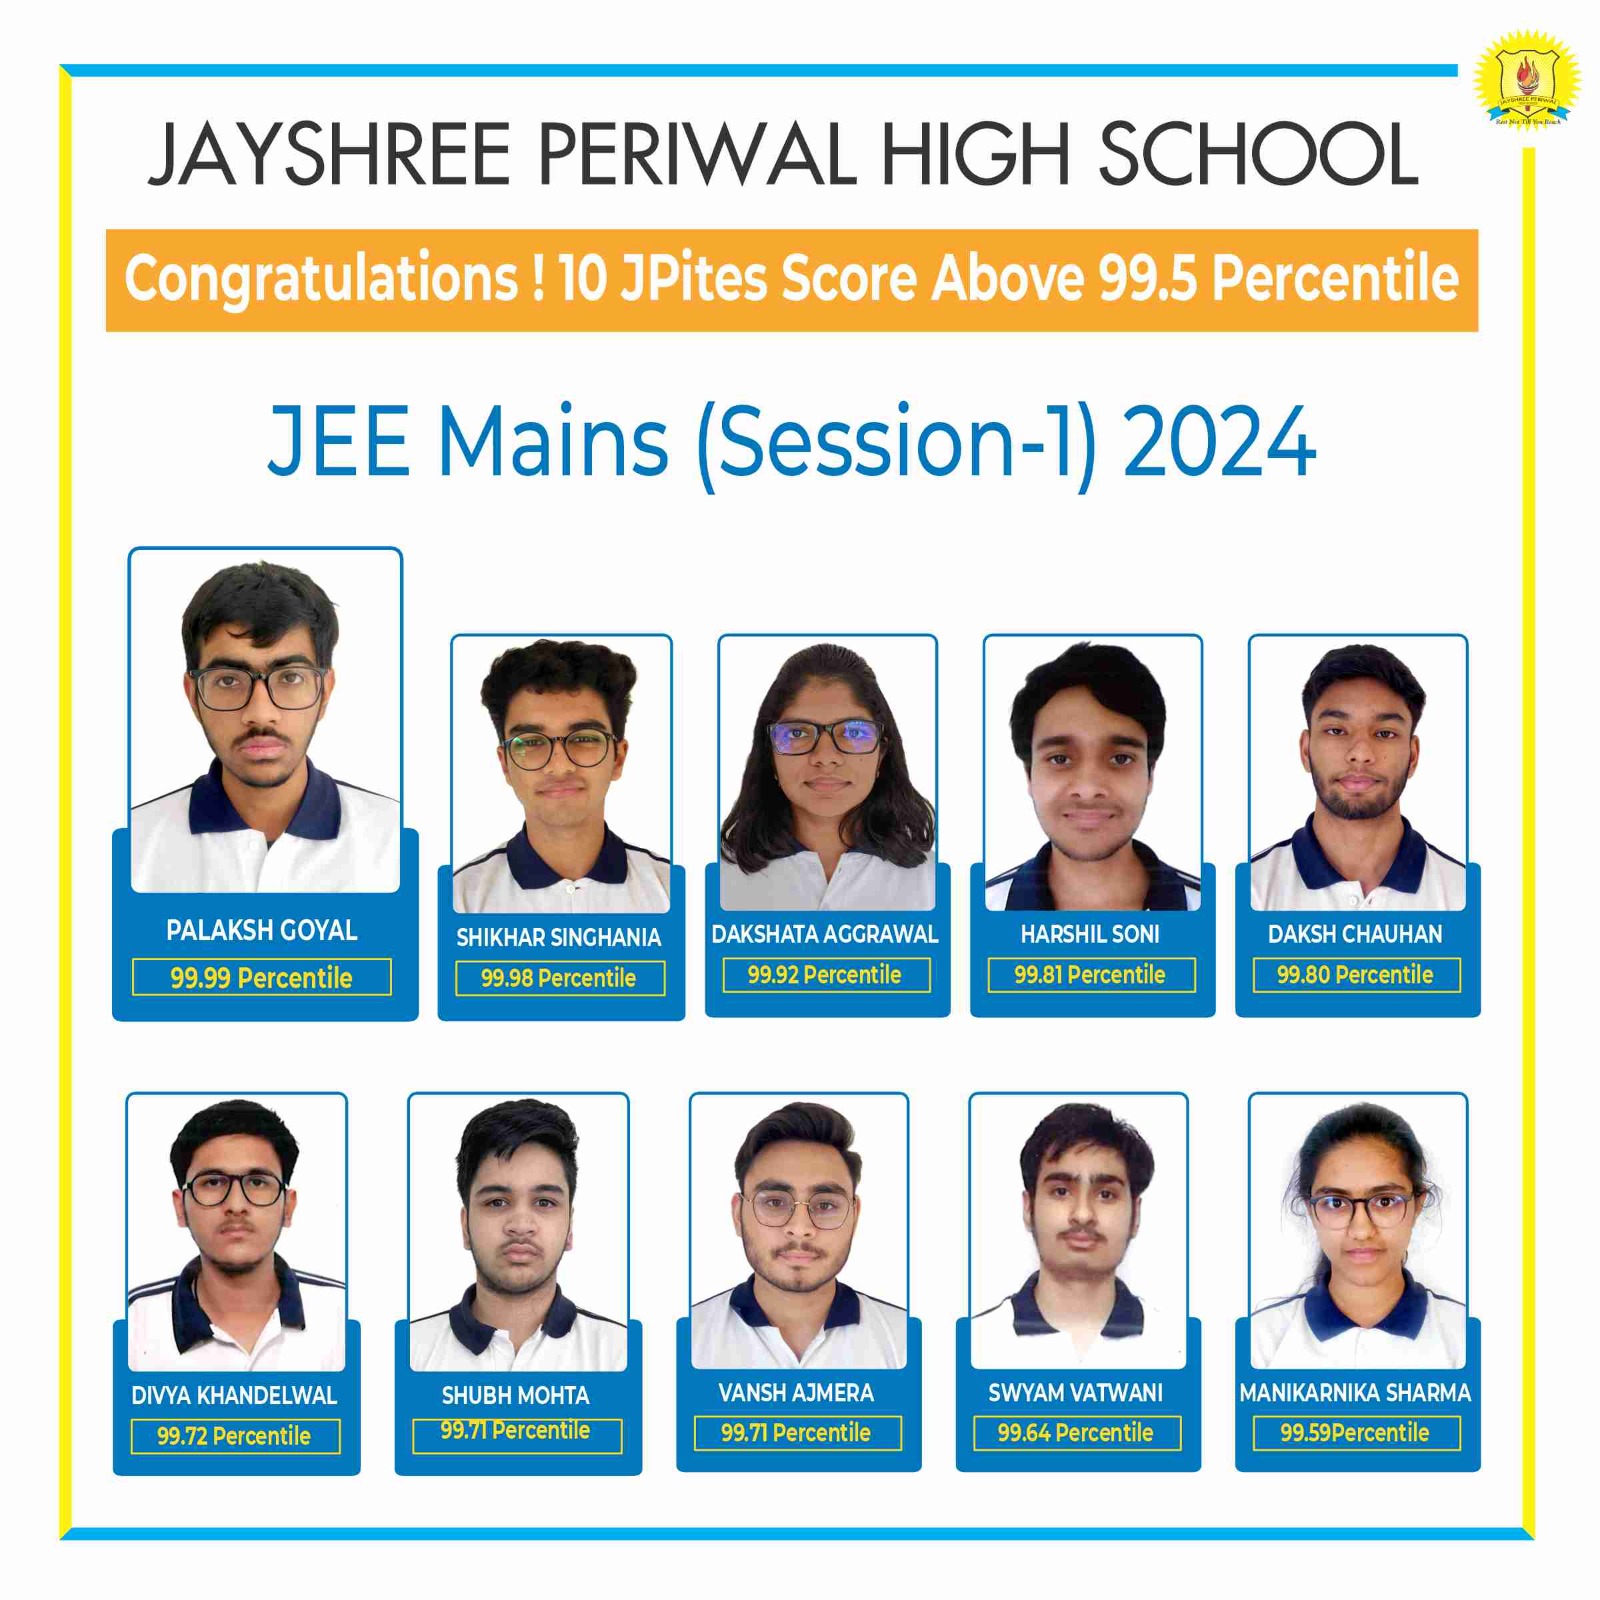 JEE MAINS RESULT 2024 SESSION 1 IMAGE